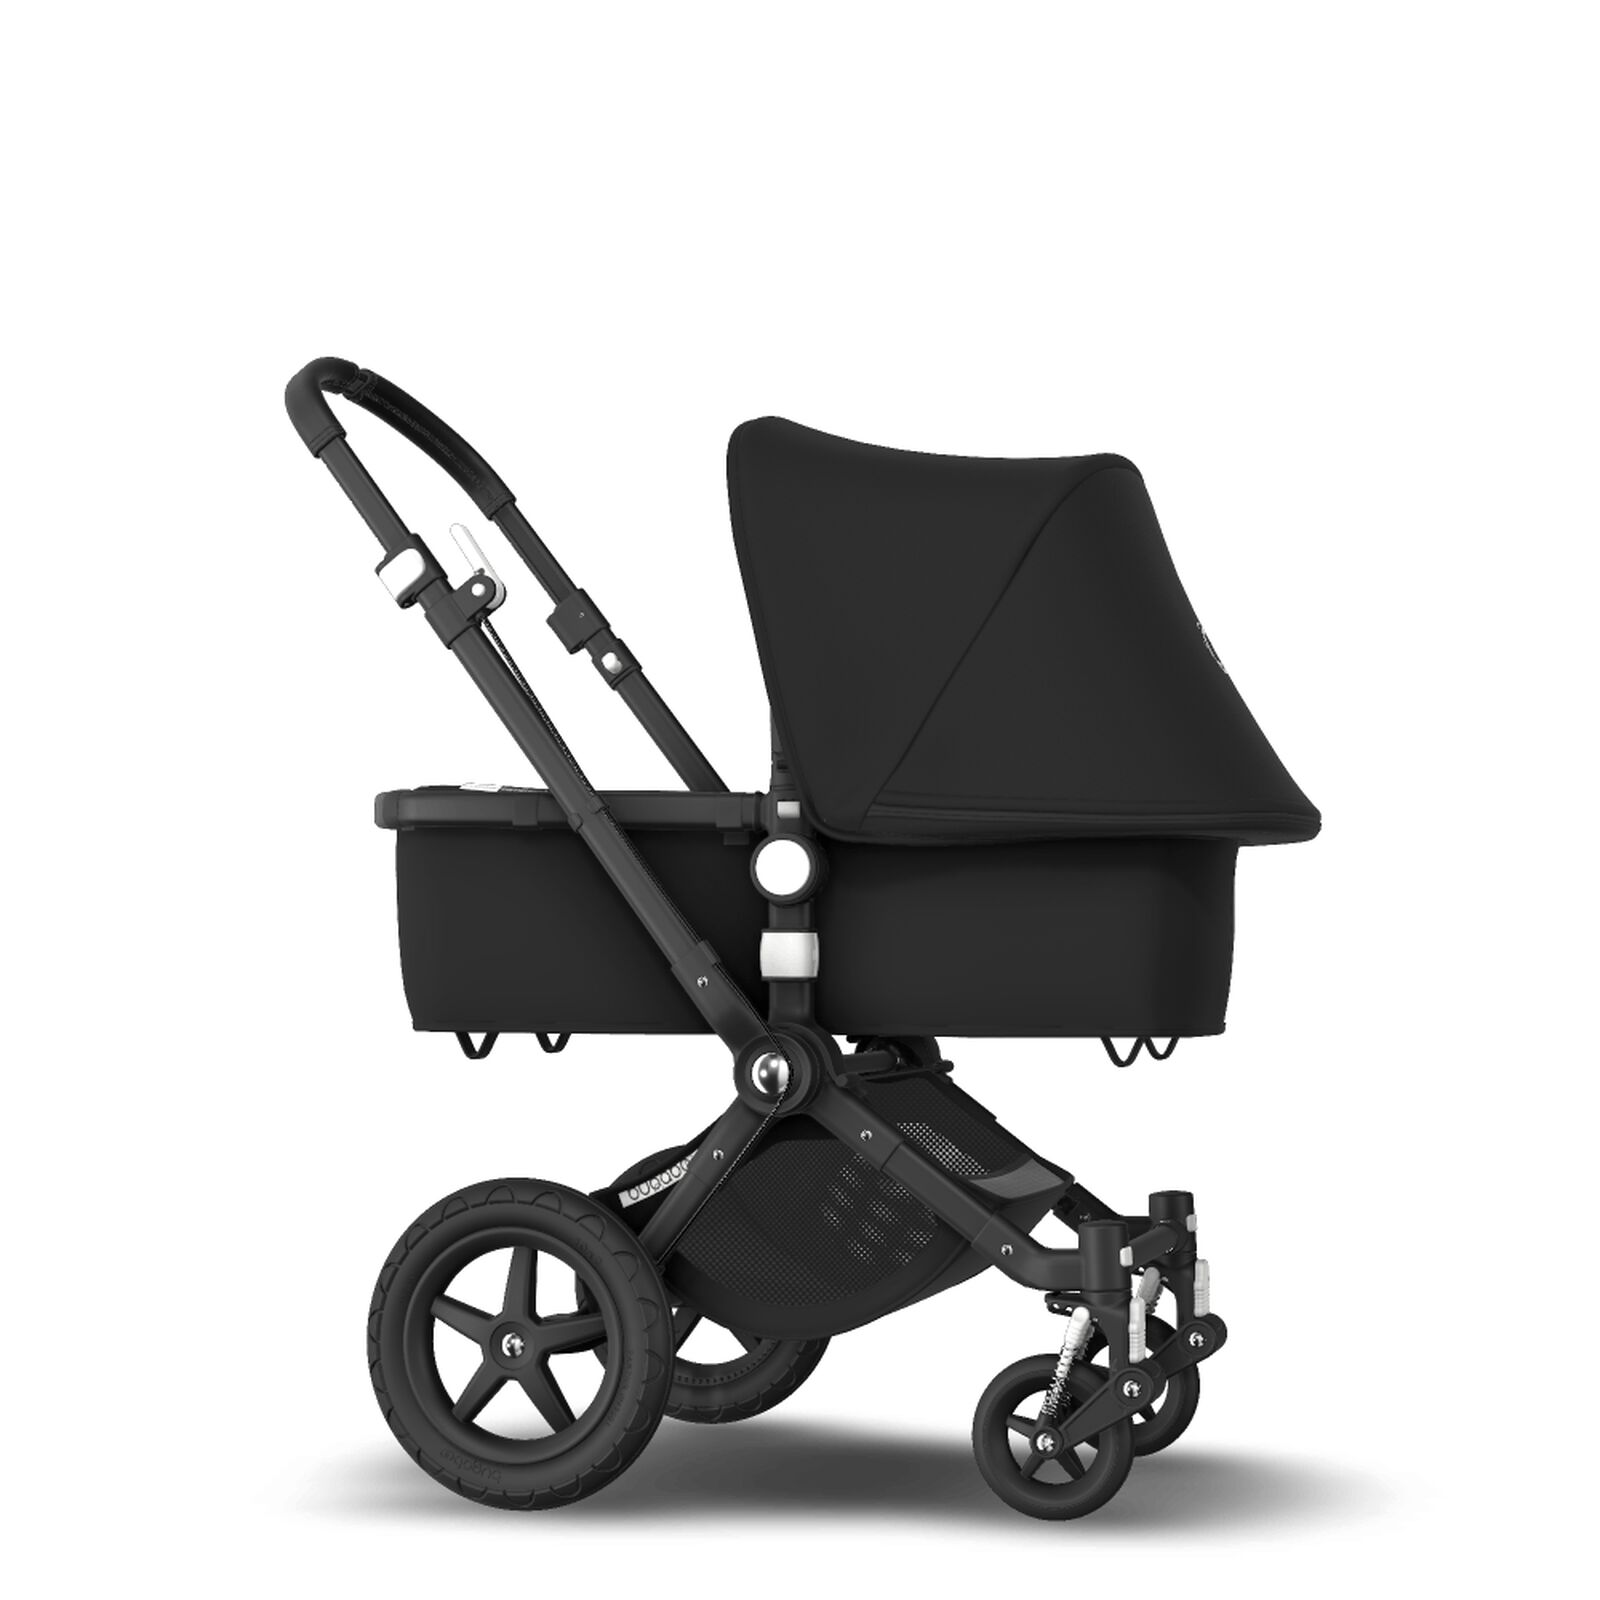 Bugaboo Cameleon 3 Plus bassinet and seat stroller - View 4